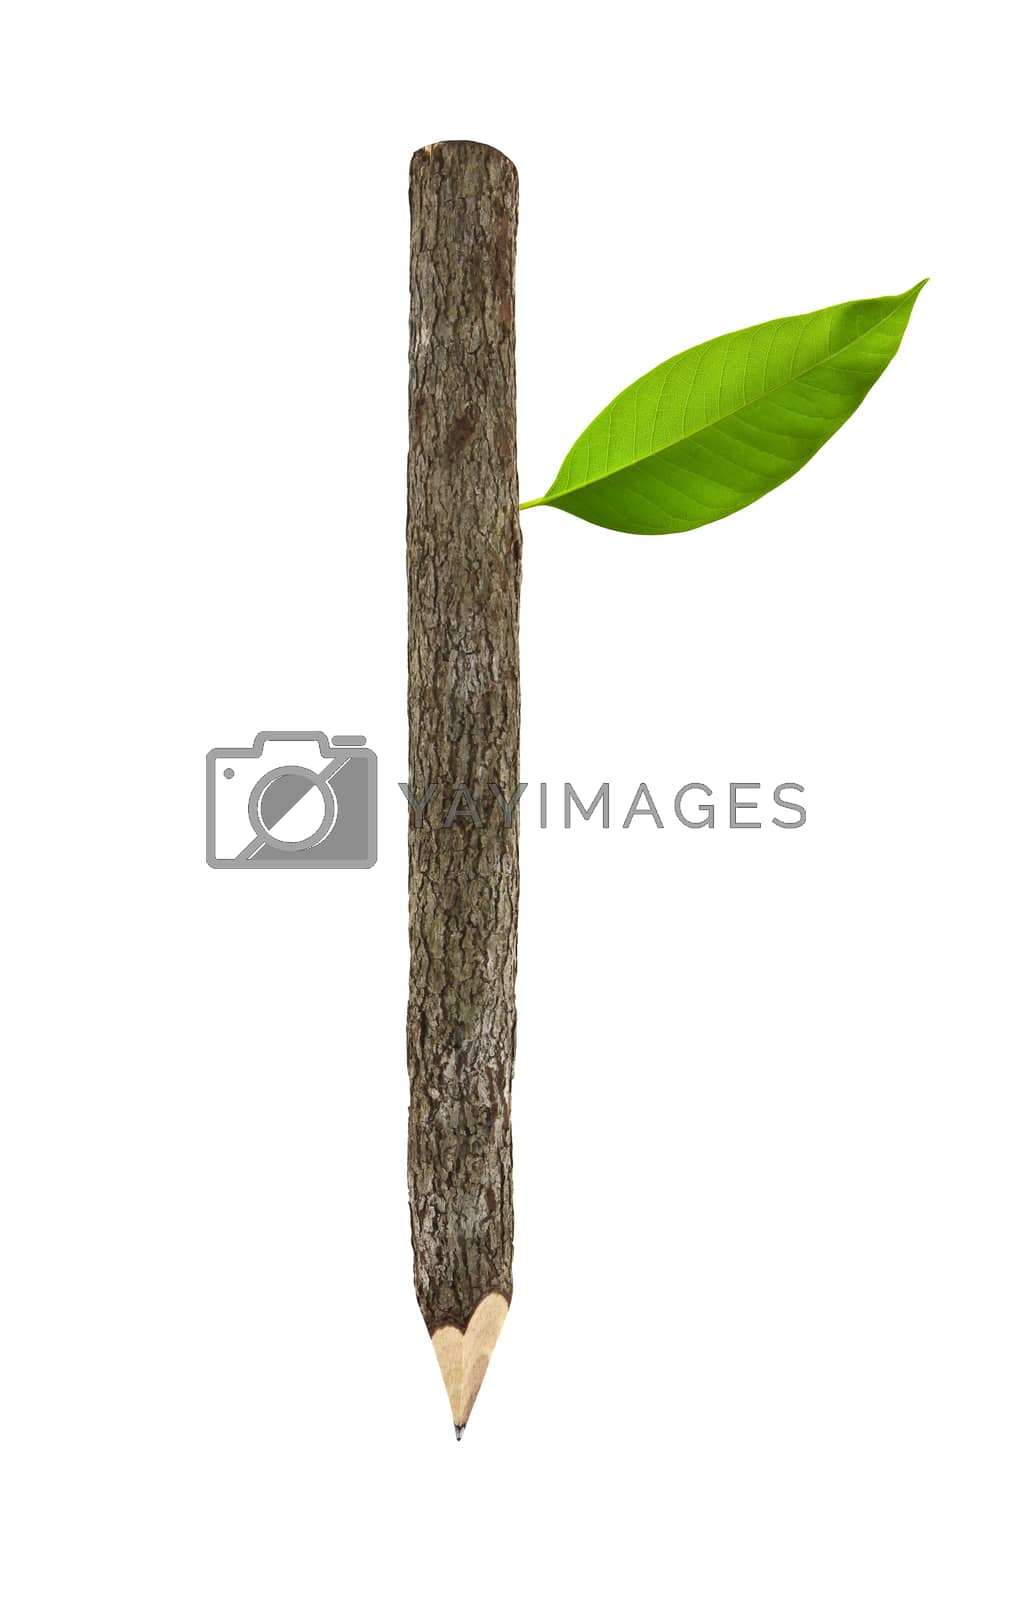 Royalty free image of bark pencil by zirconicusso